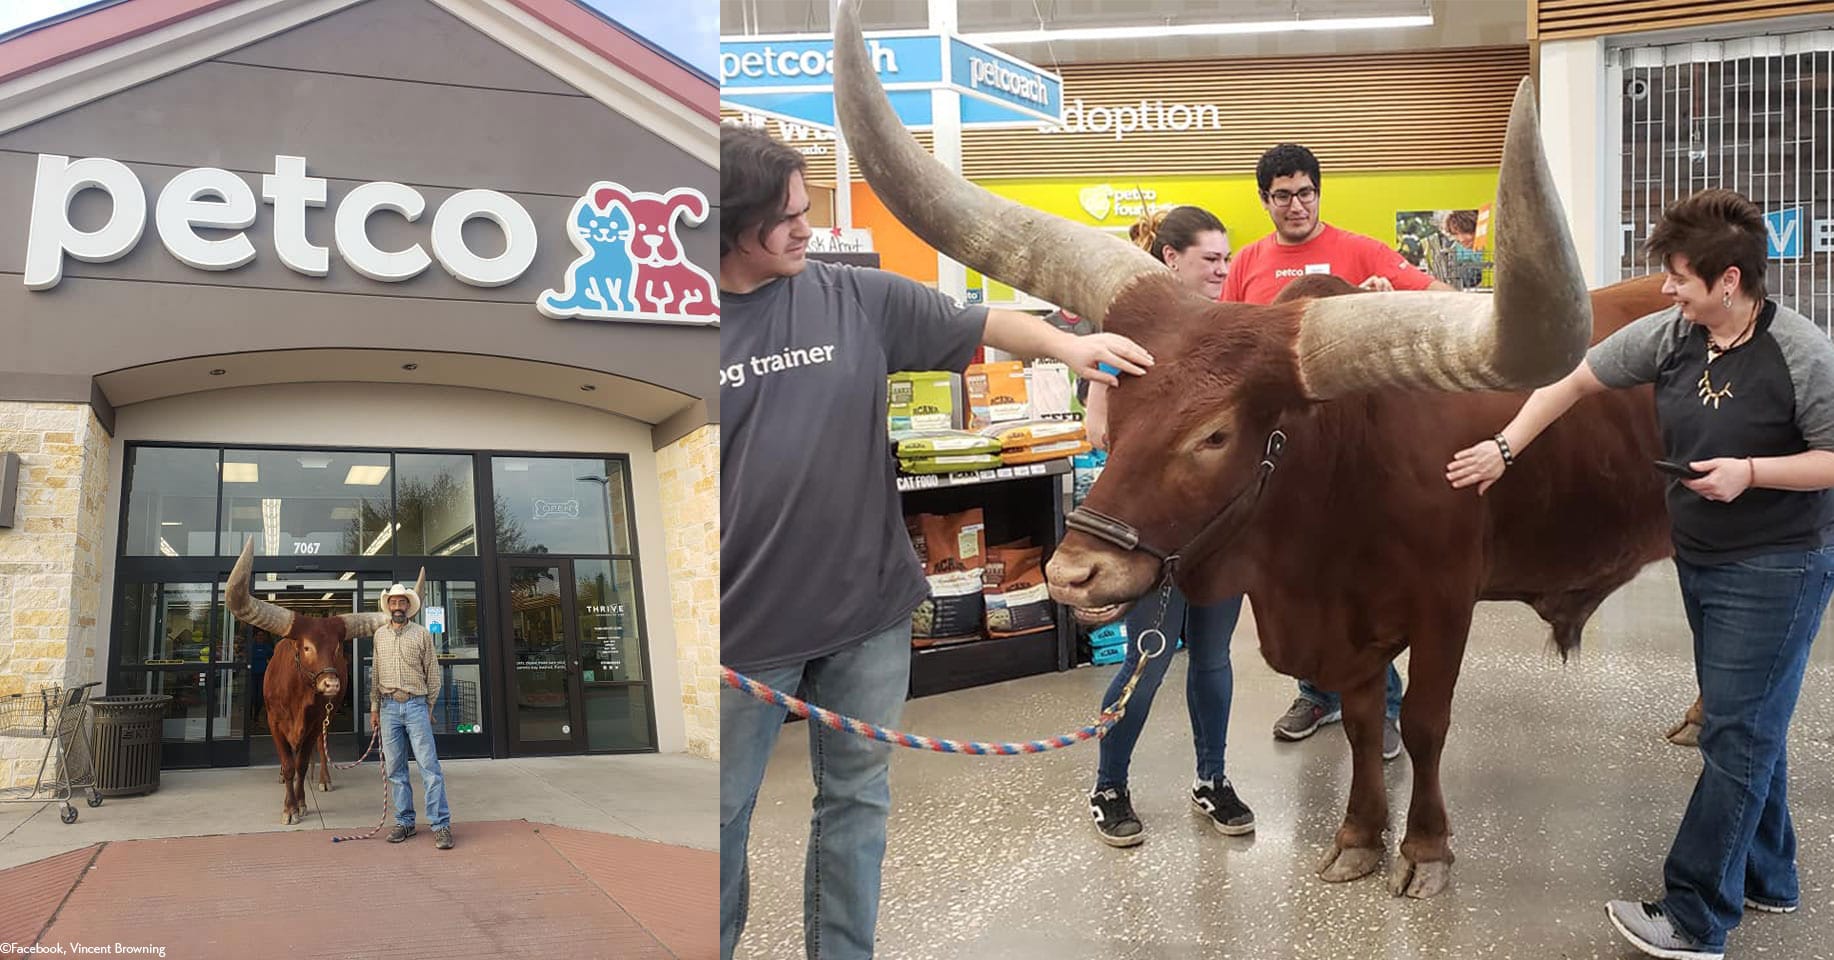 Man Tests Petco ’s ‘All Leashed Animals Welcome’ Policy with His 1,600-Pound Bull